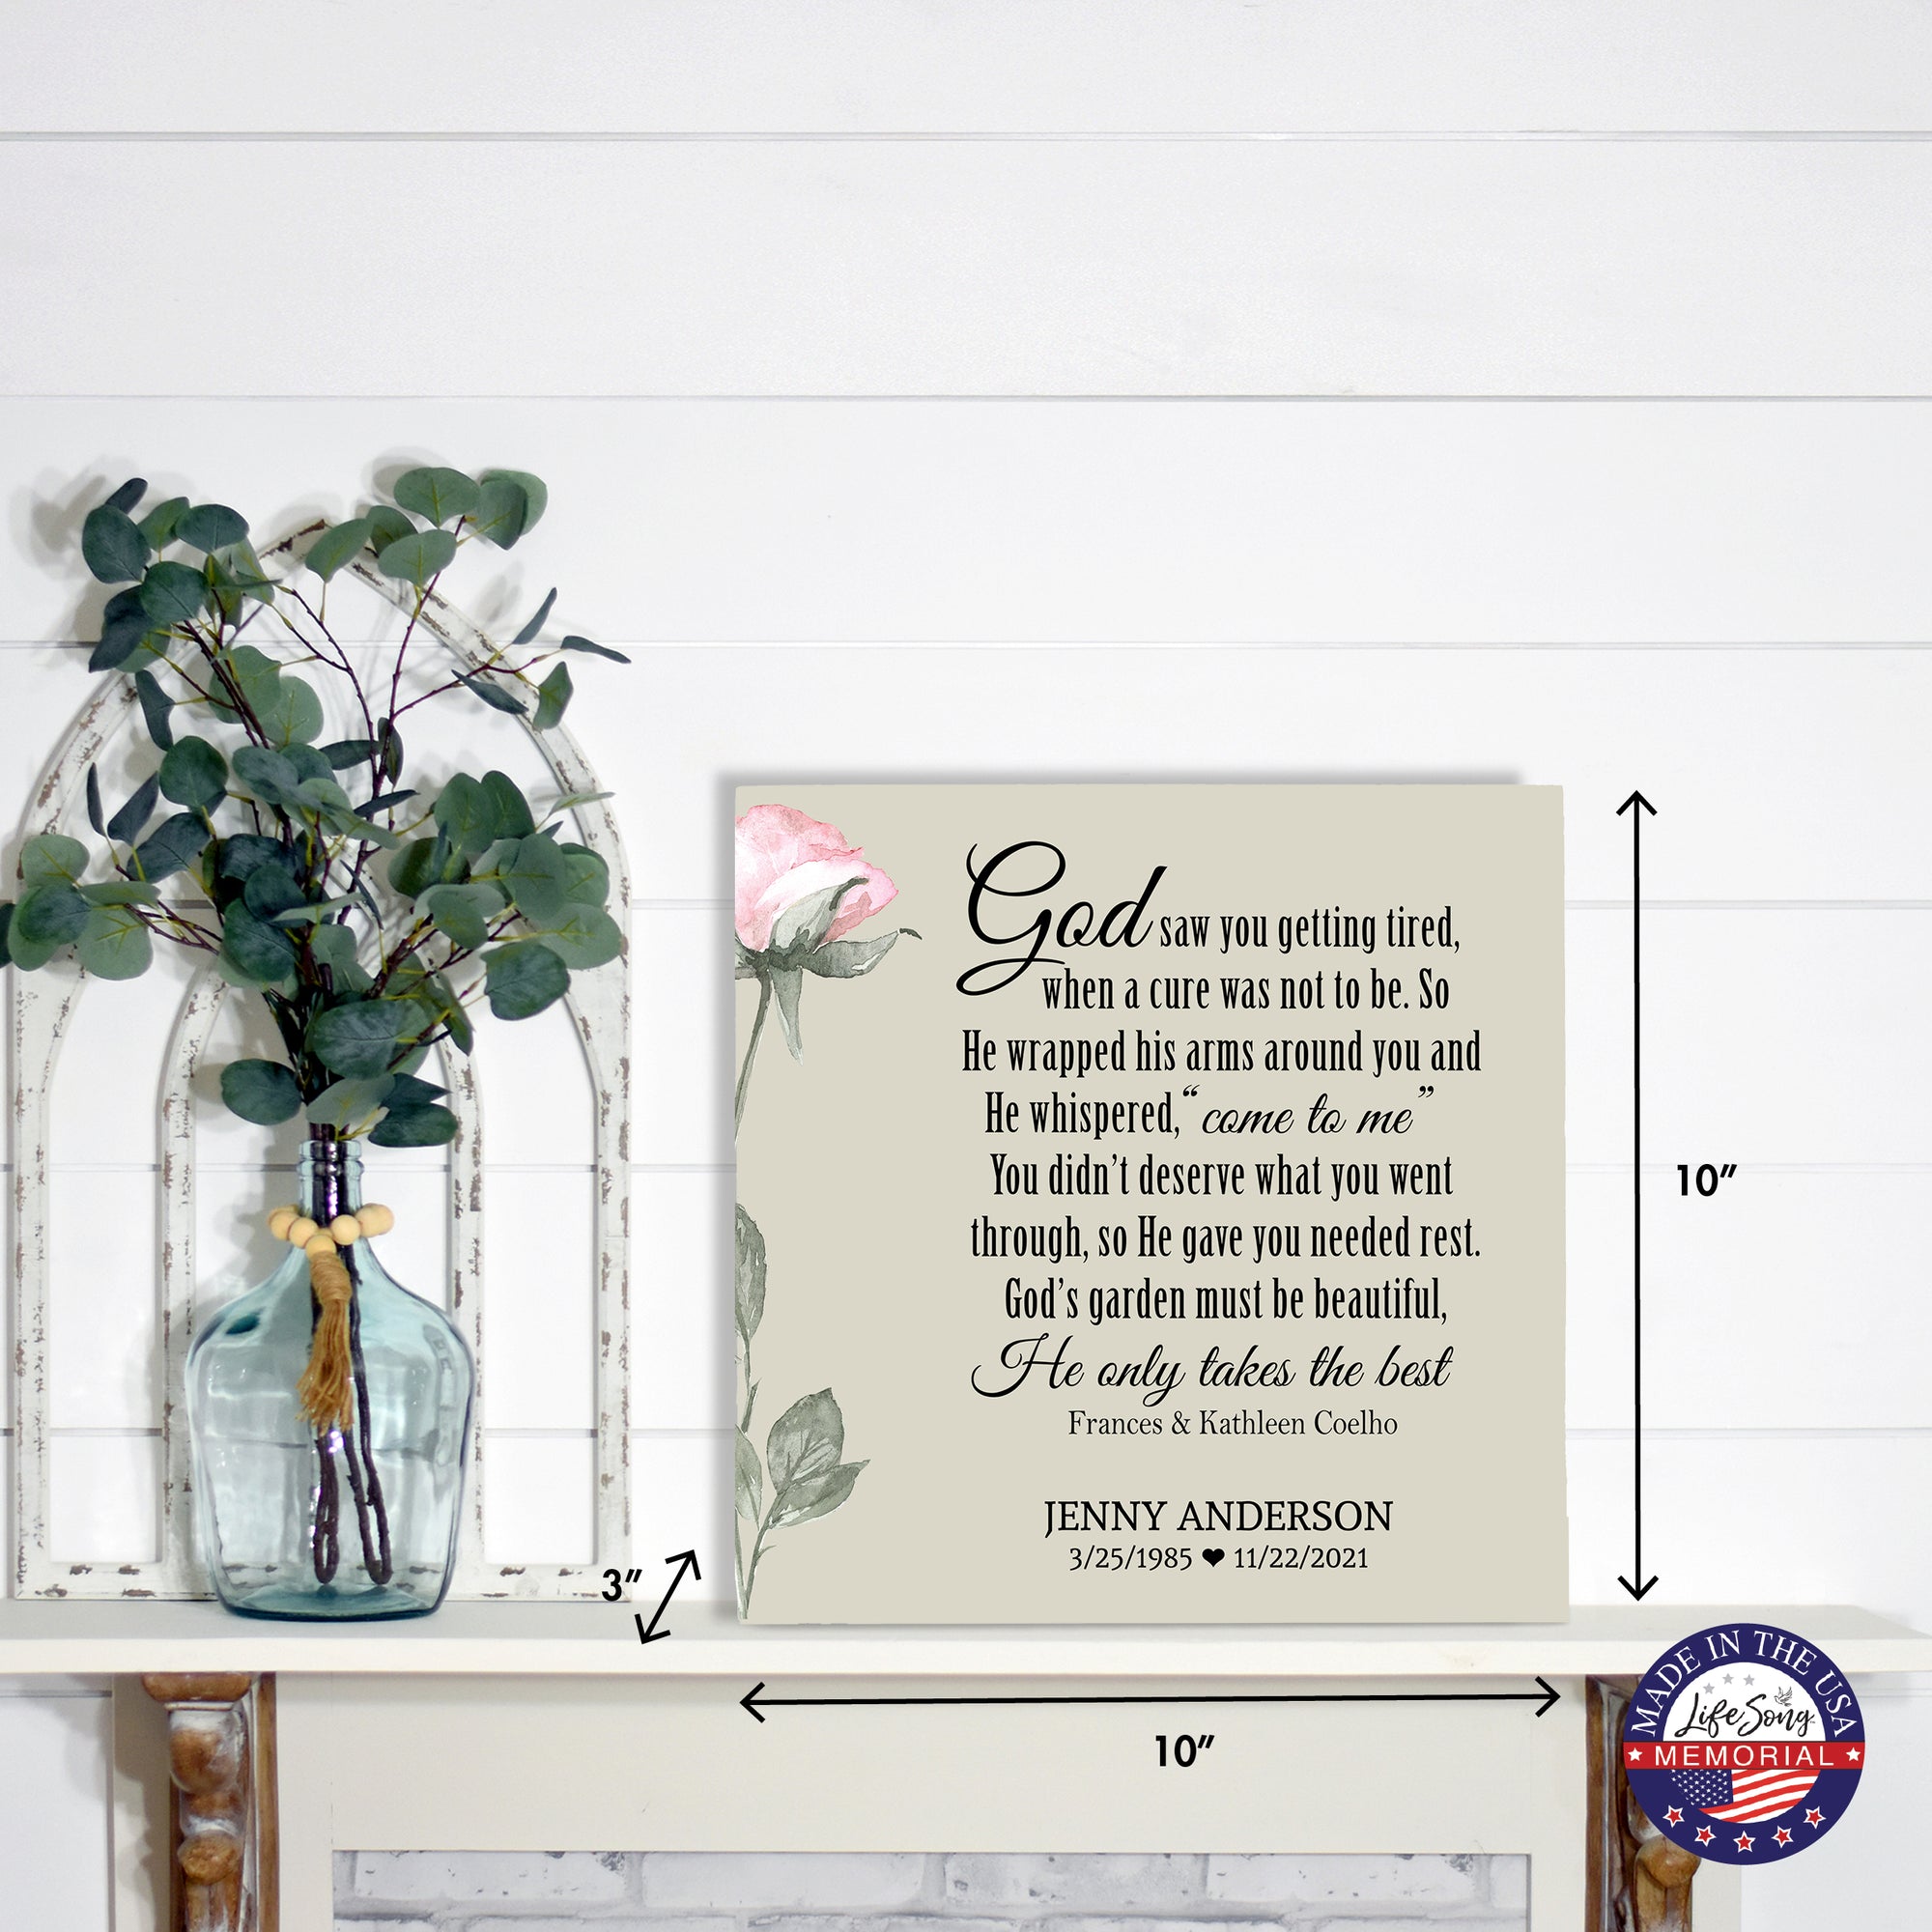 Timeless Human Memorial Shadow Box Urn With Inspirational Verse in Ivory - God Saw You